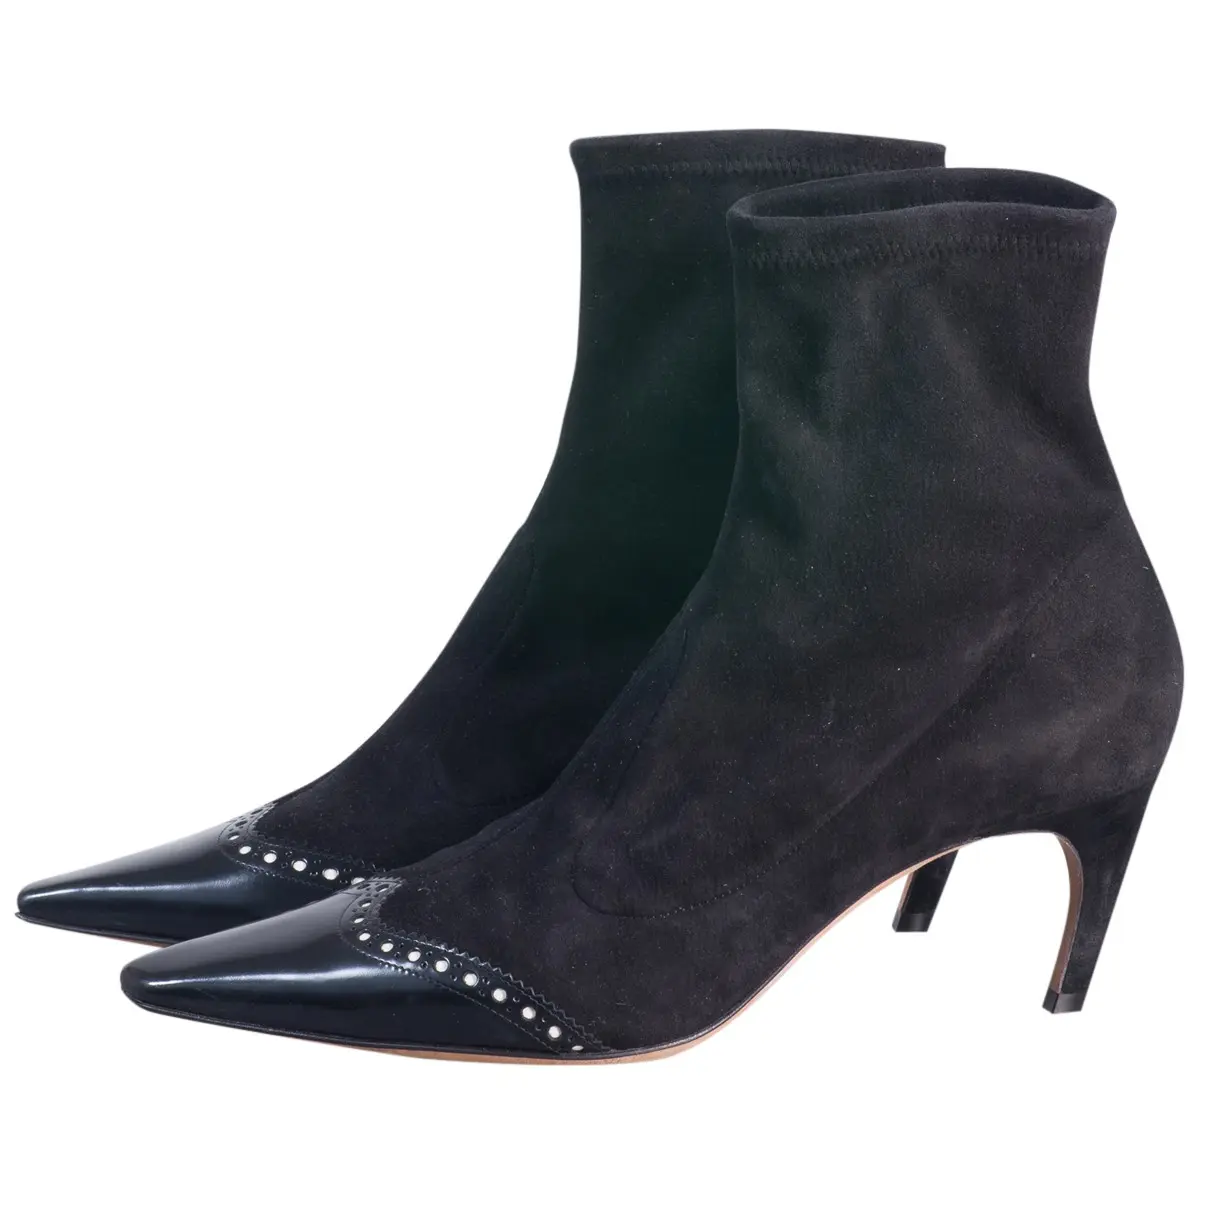 Spectadior ankle boots Dior